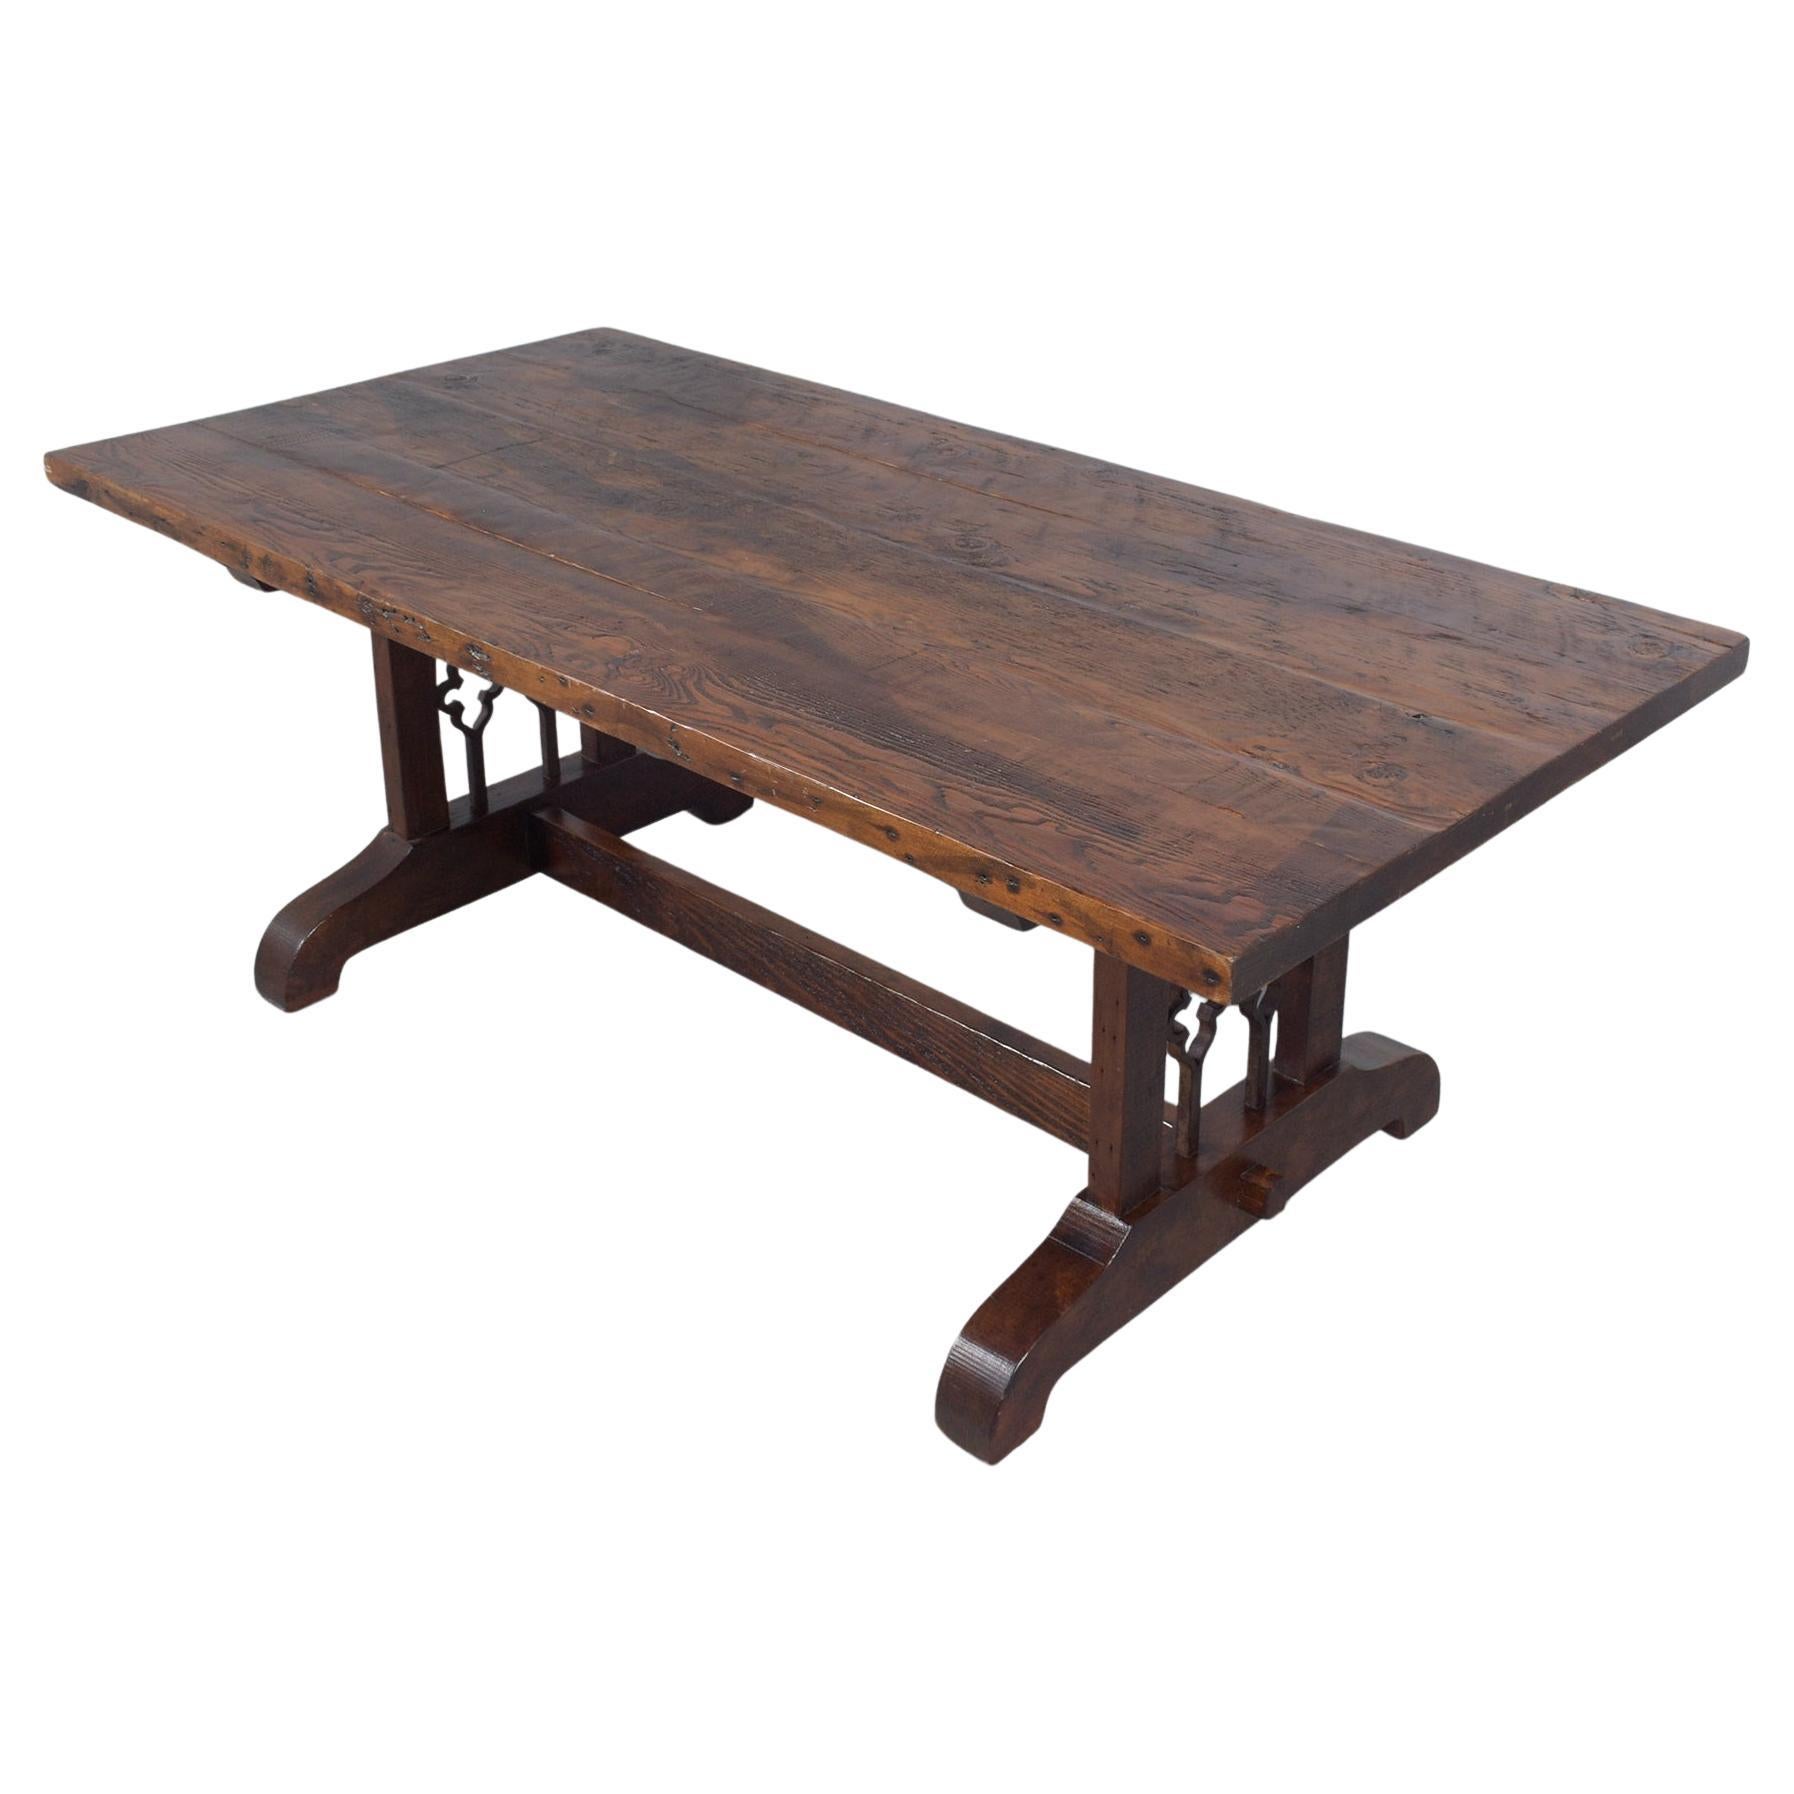 Vintage Solid Wood Dining Table with Iron Accents and Pedestal Legs For Sale